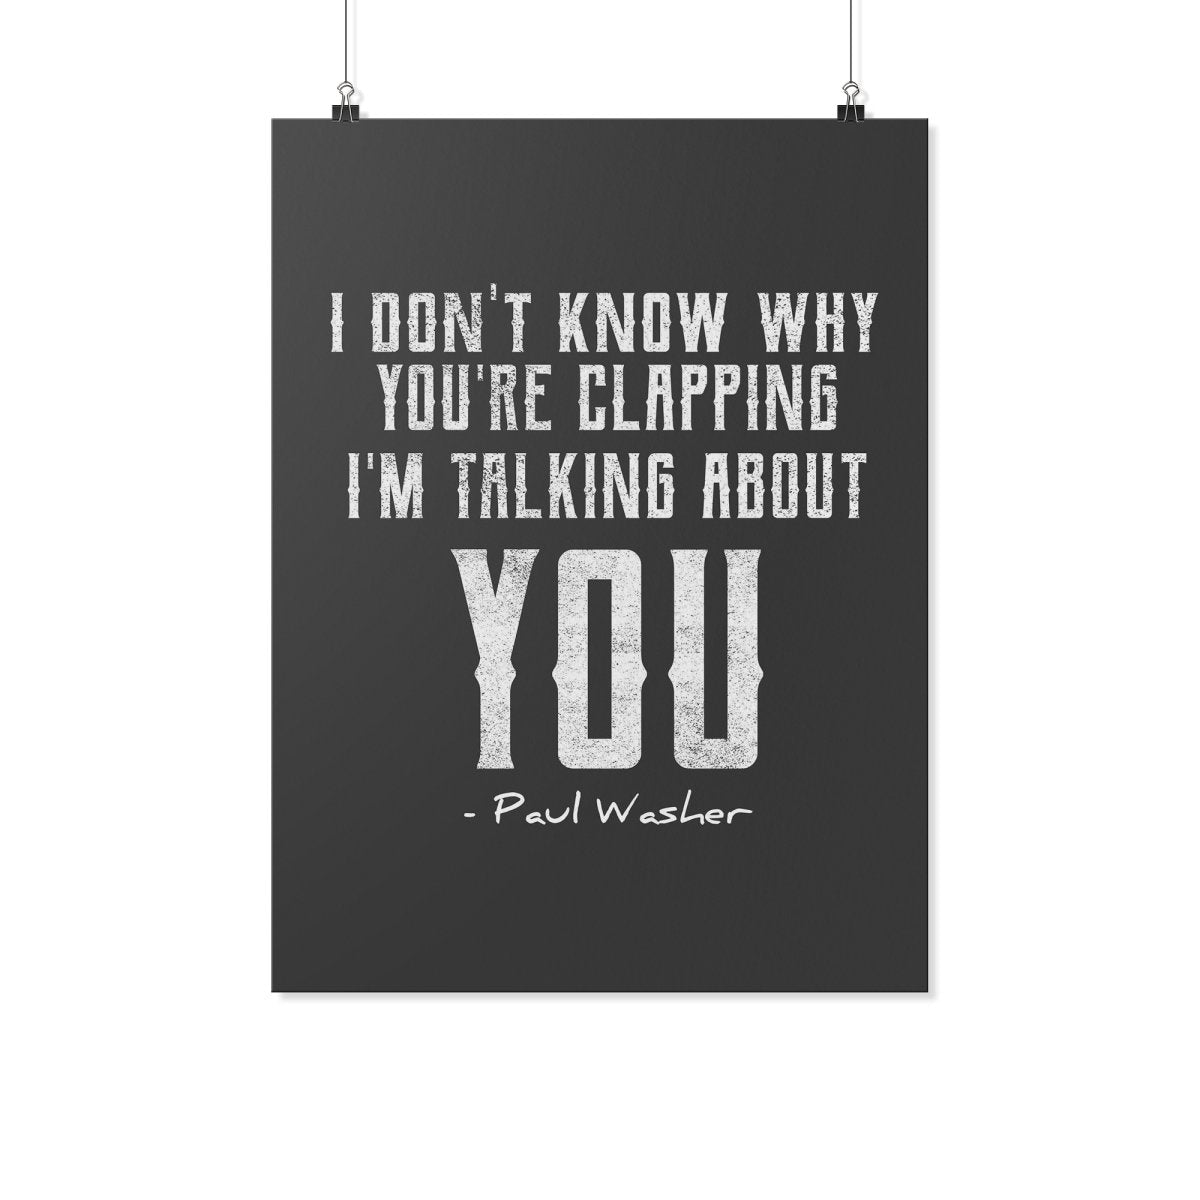 I Don't Know Why You're Claping (Wall Poster) - SDG Clothing